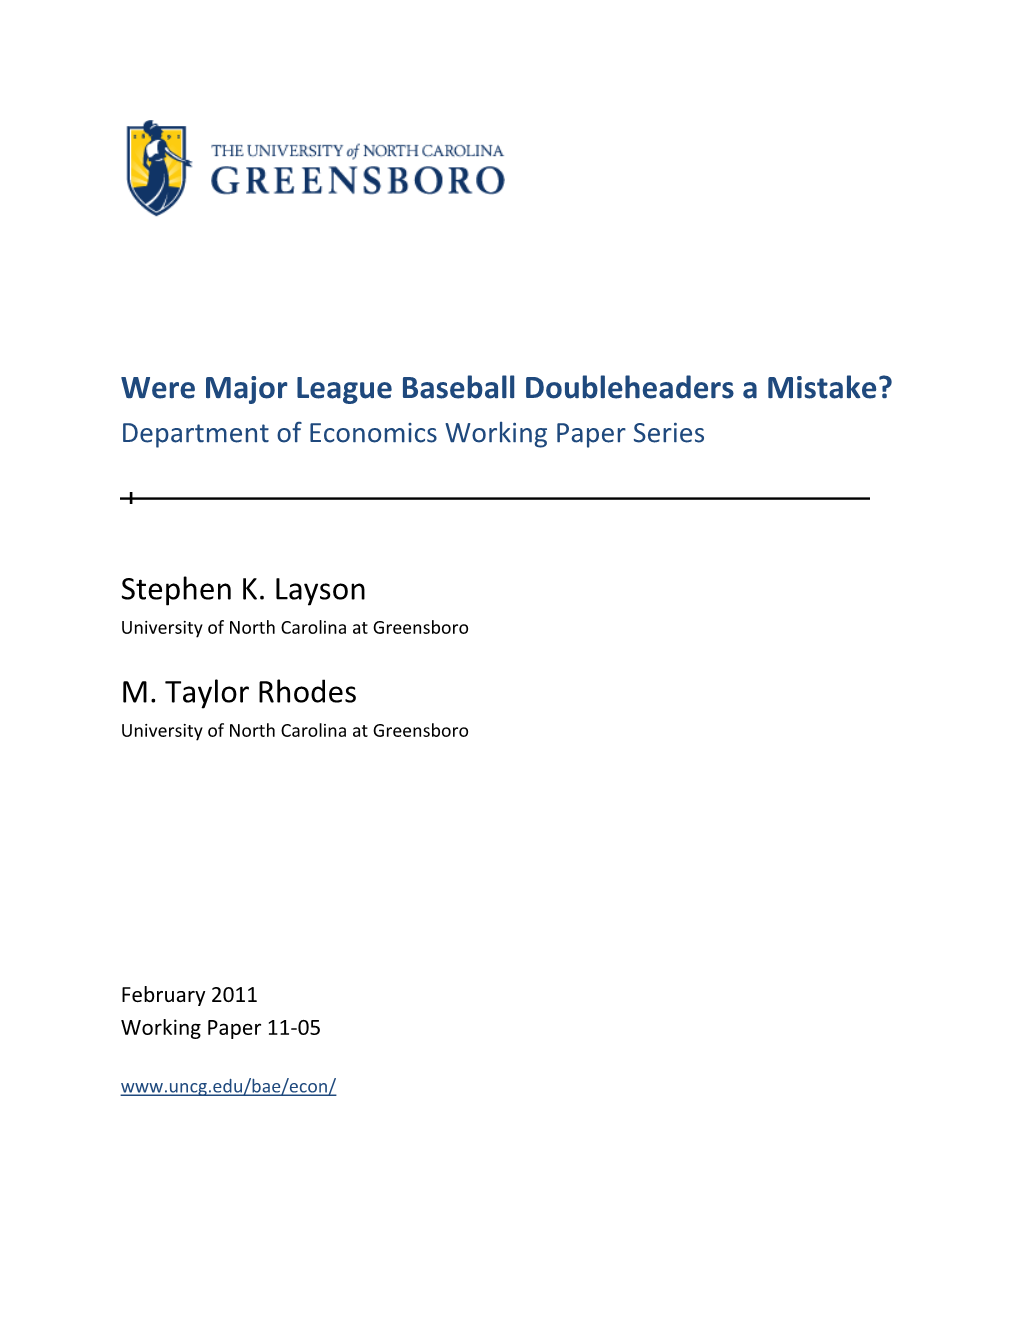 Were Major League Baseball Doubleheaders a Mistake? Department of Economics Working Paper Series